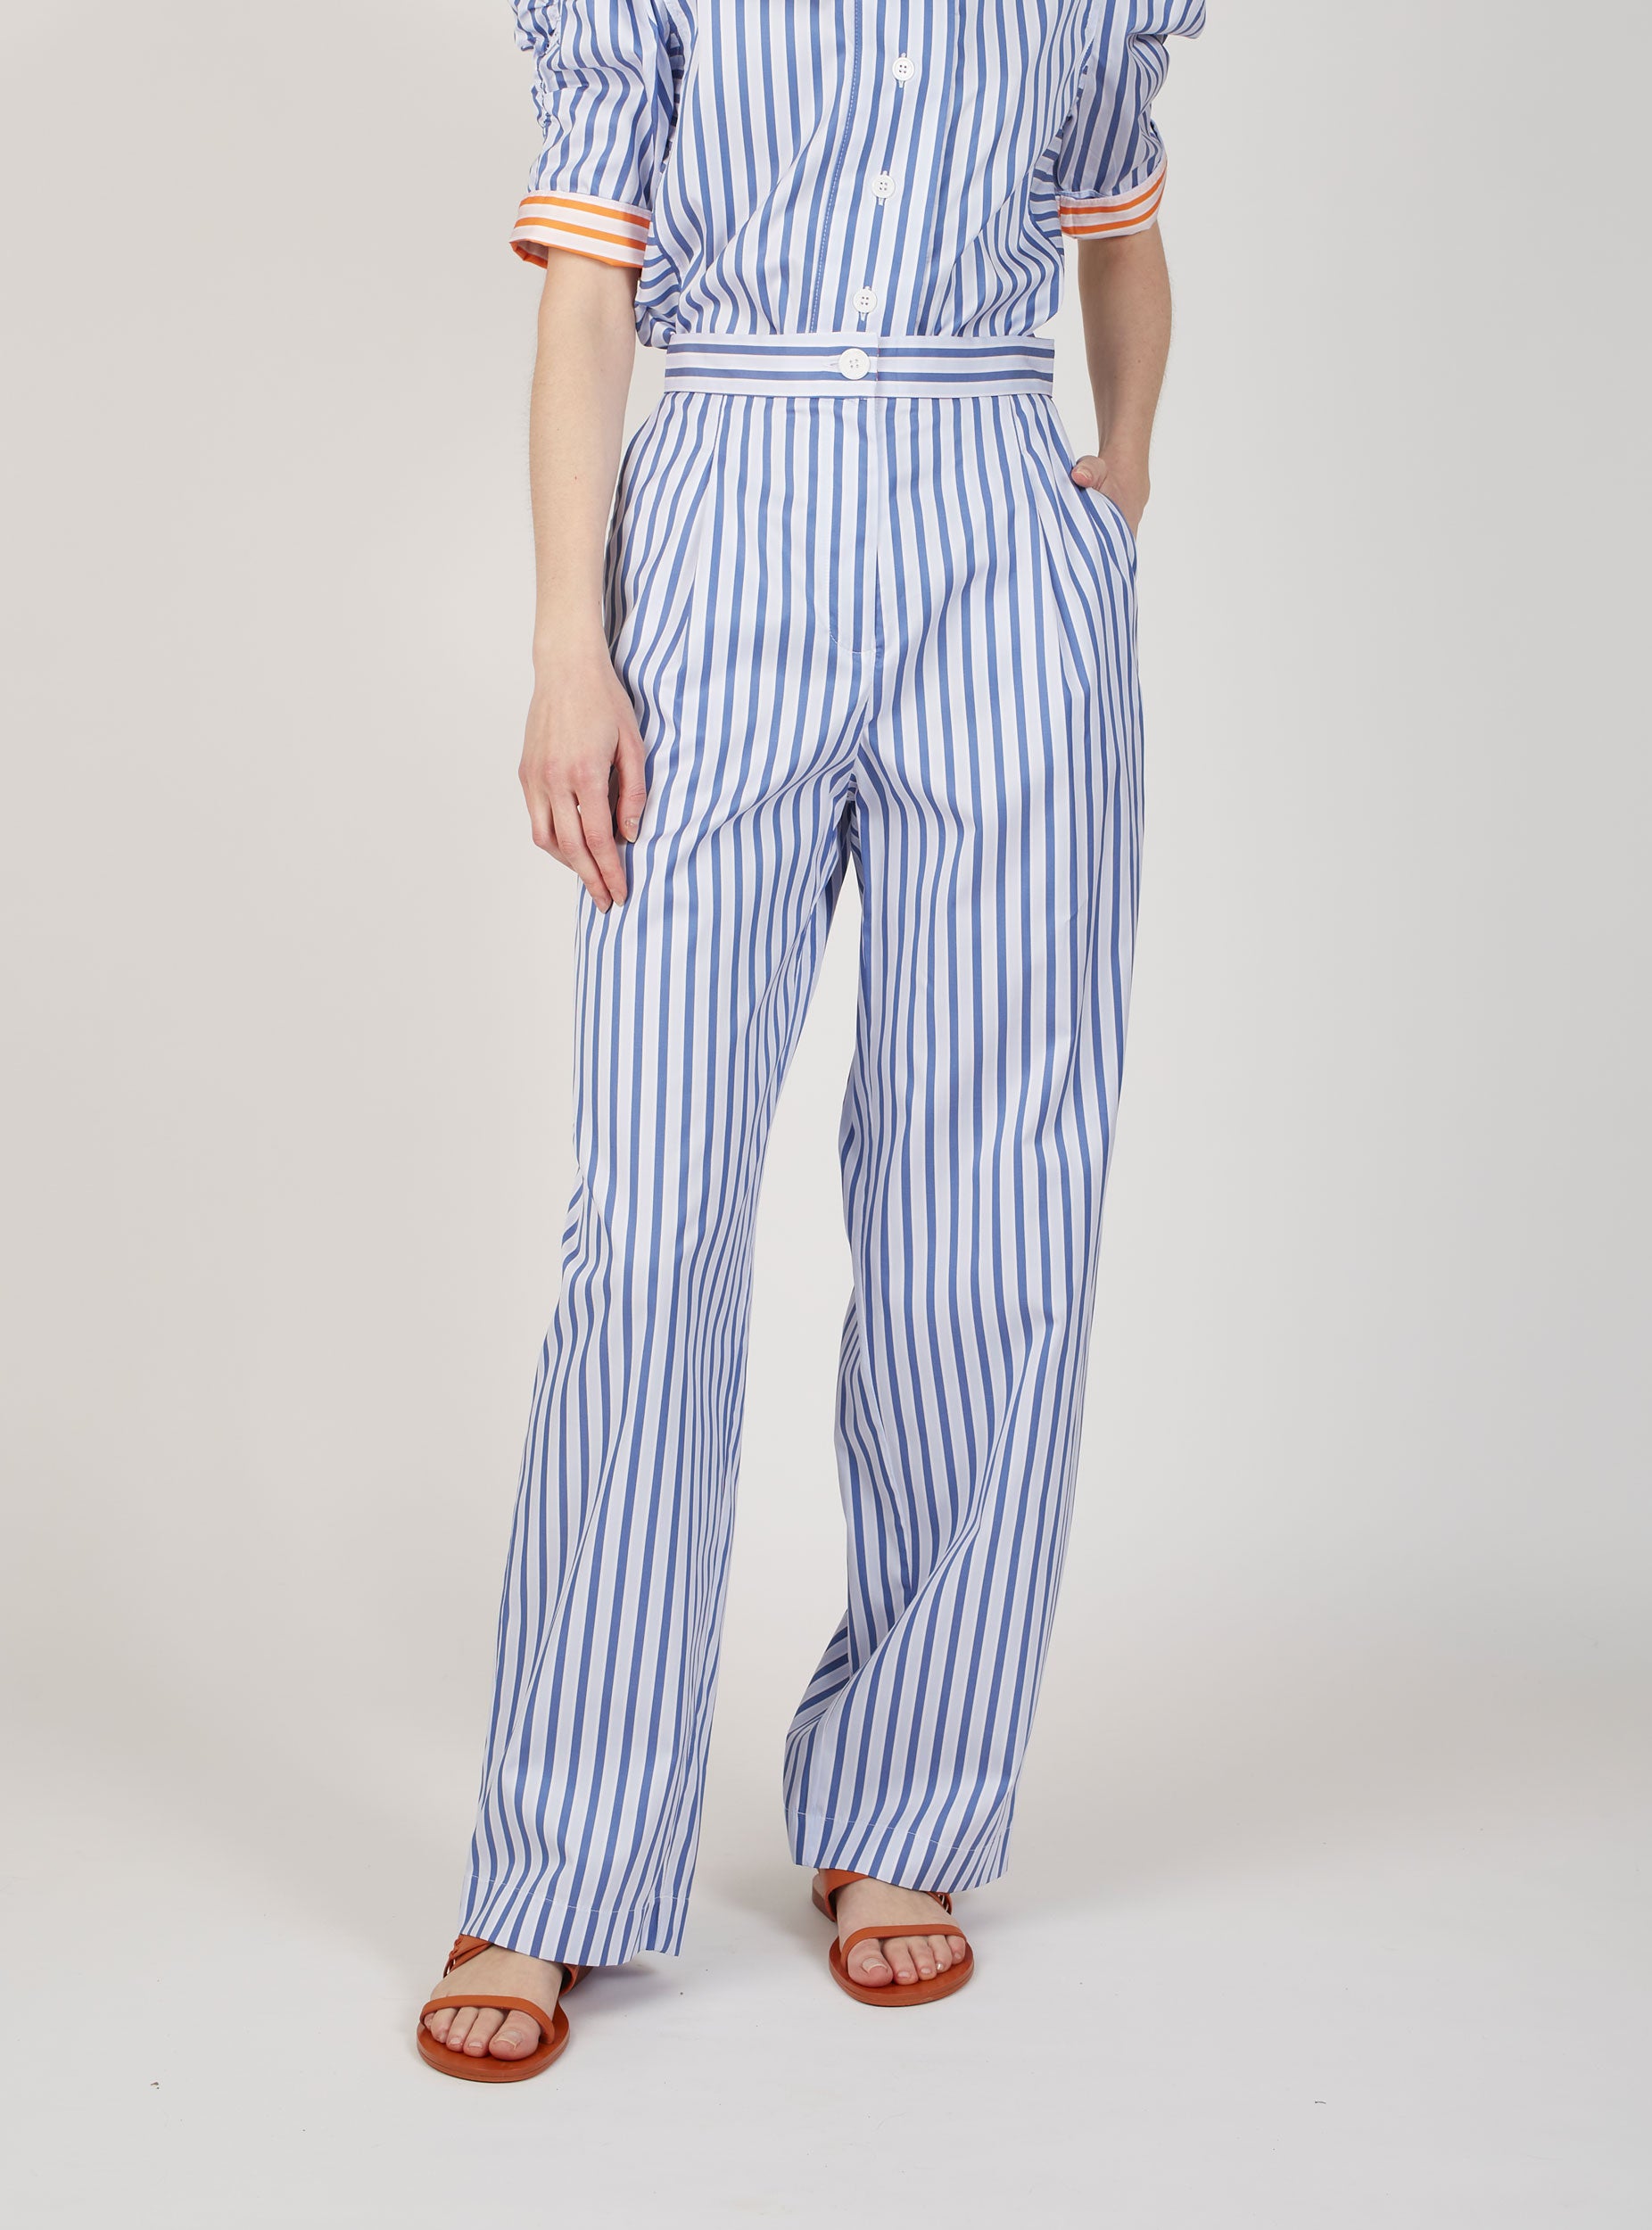 Alfred Dunhill Mayfair Slim Fit Plaid Wool Trousers, $590 | MR PORTER |  Lookastic